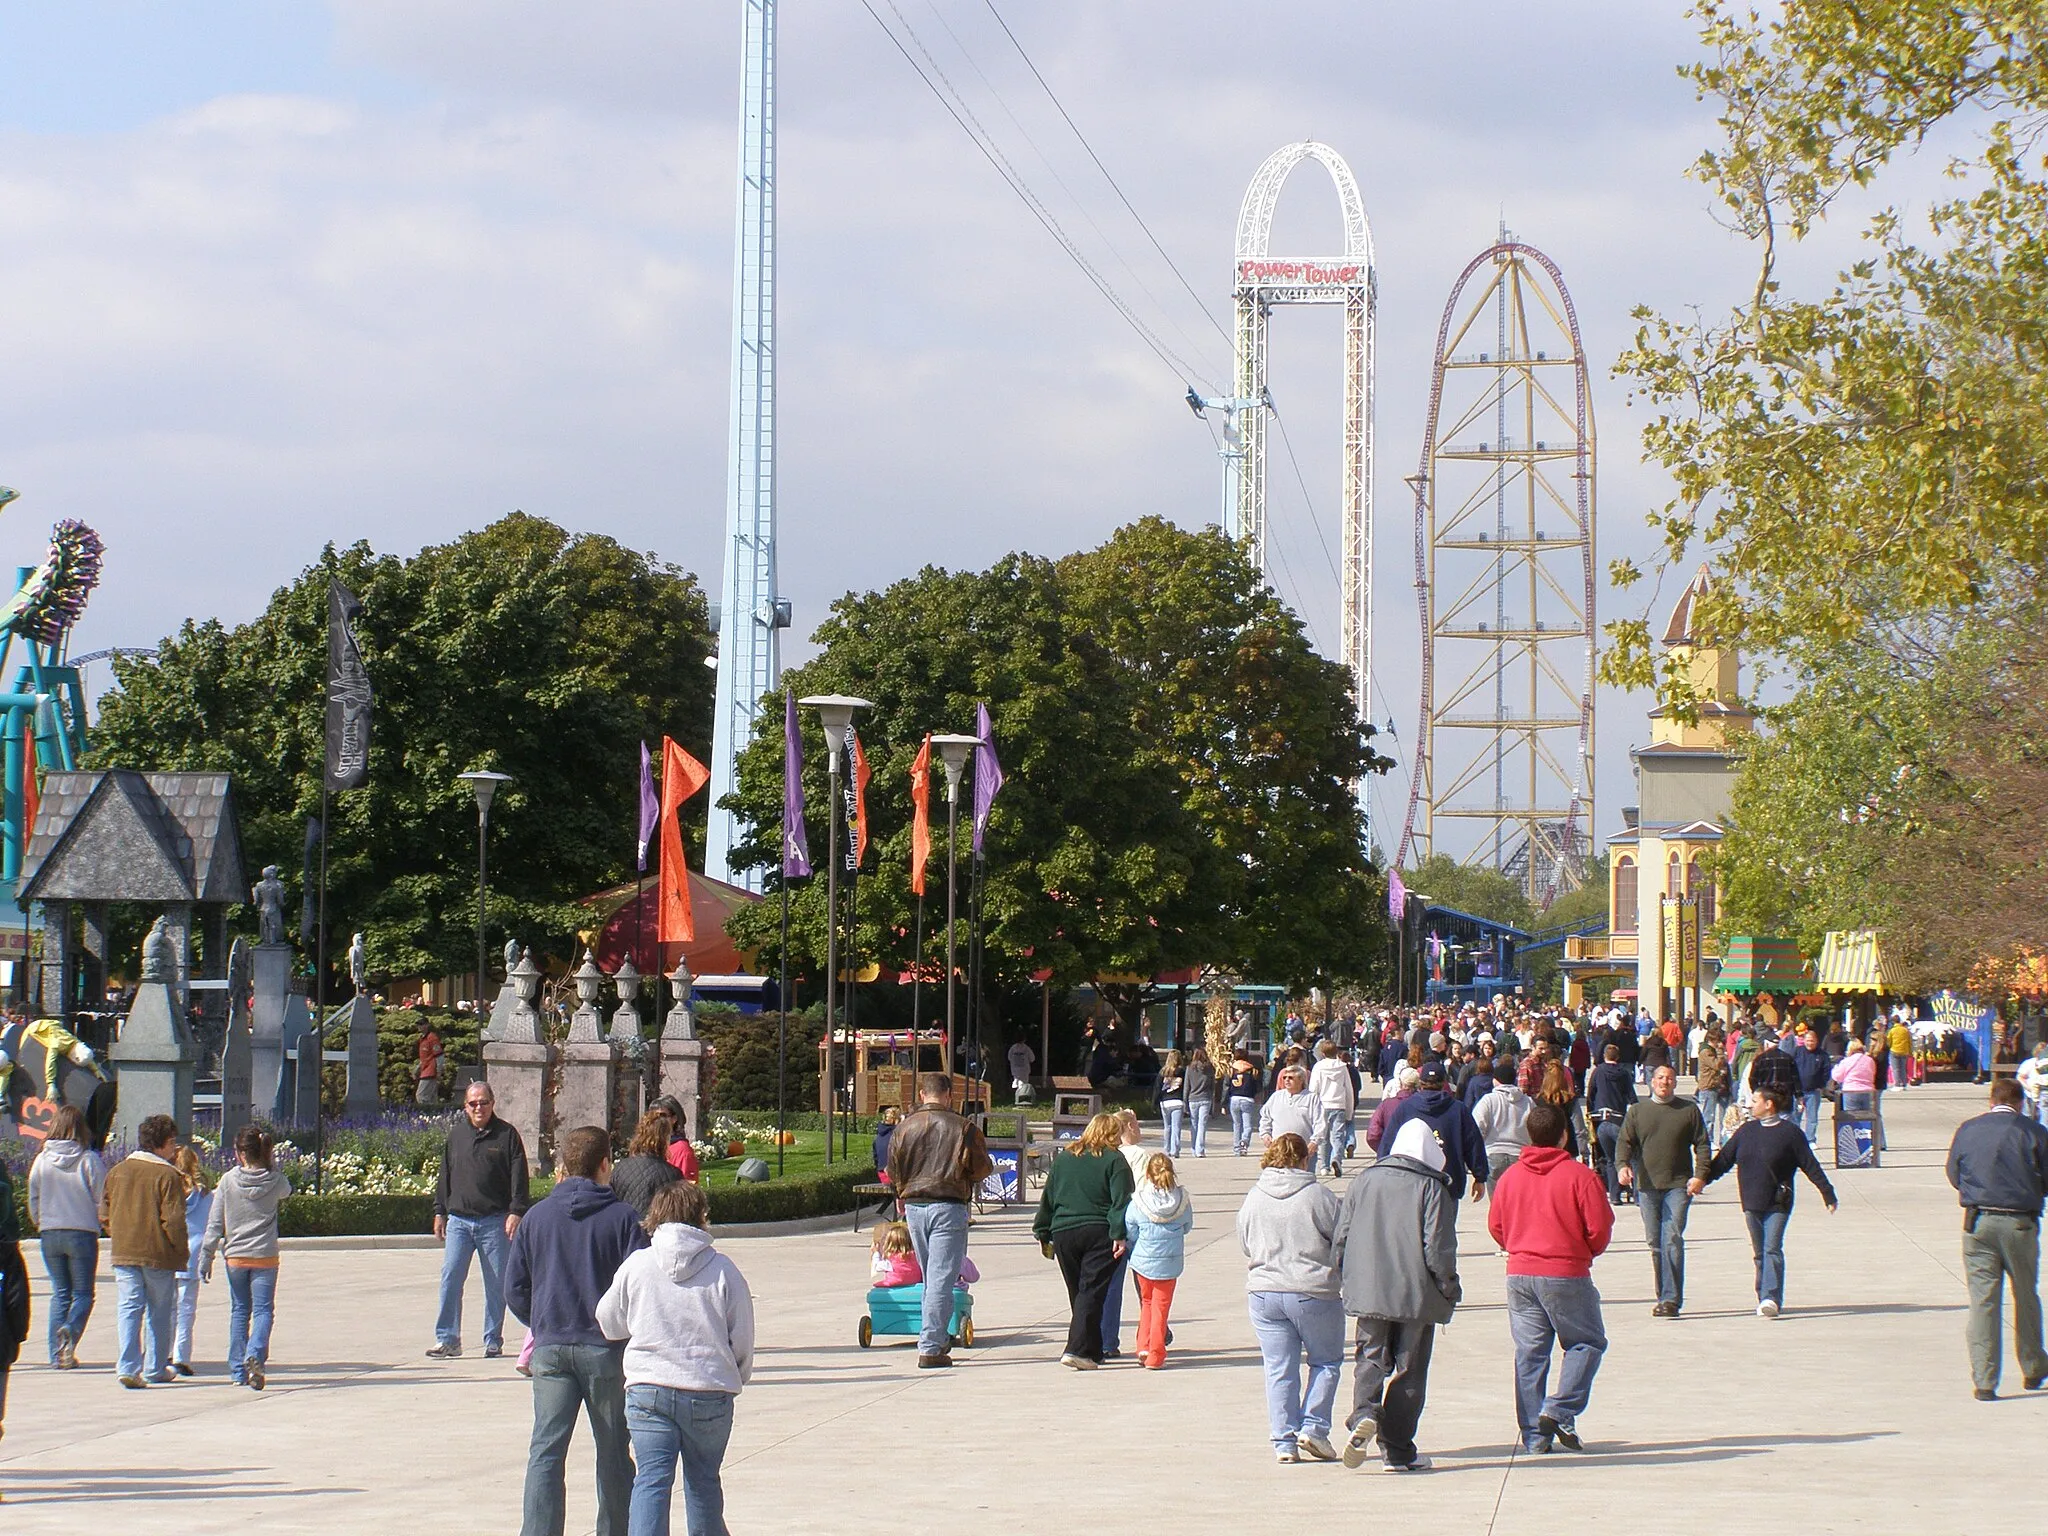 Photo showing: The Midway at Cedar Point.